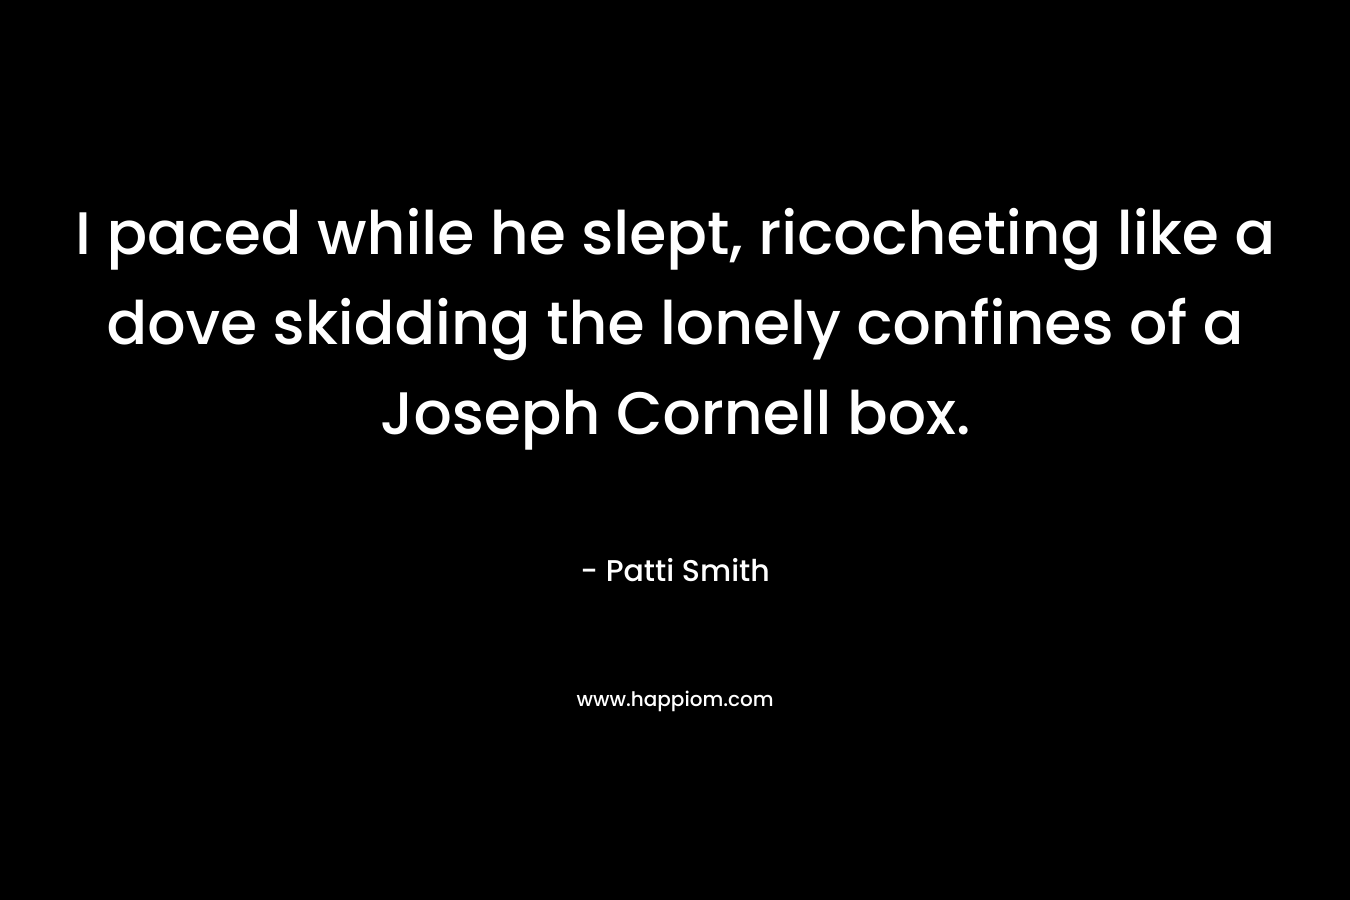 I paced while he slept, ricocheting like a dove skidding the lonely confines of a Joseph Cornell box.